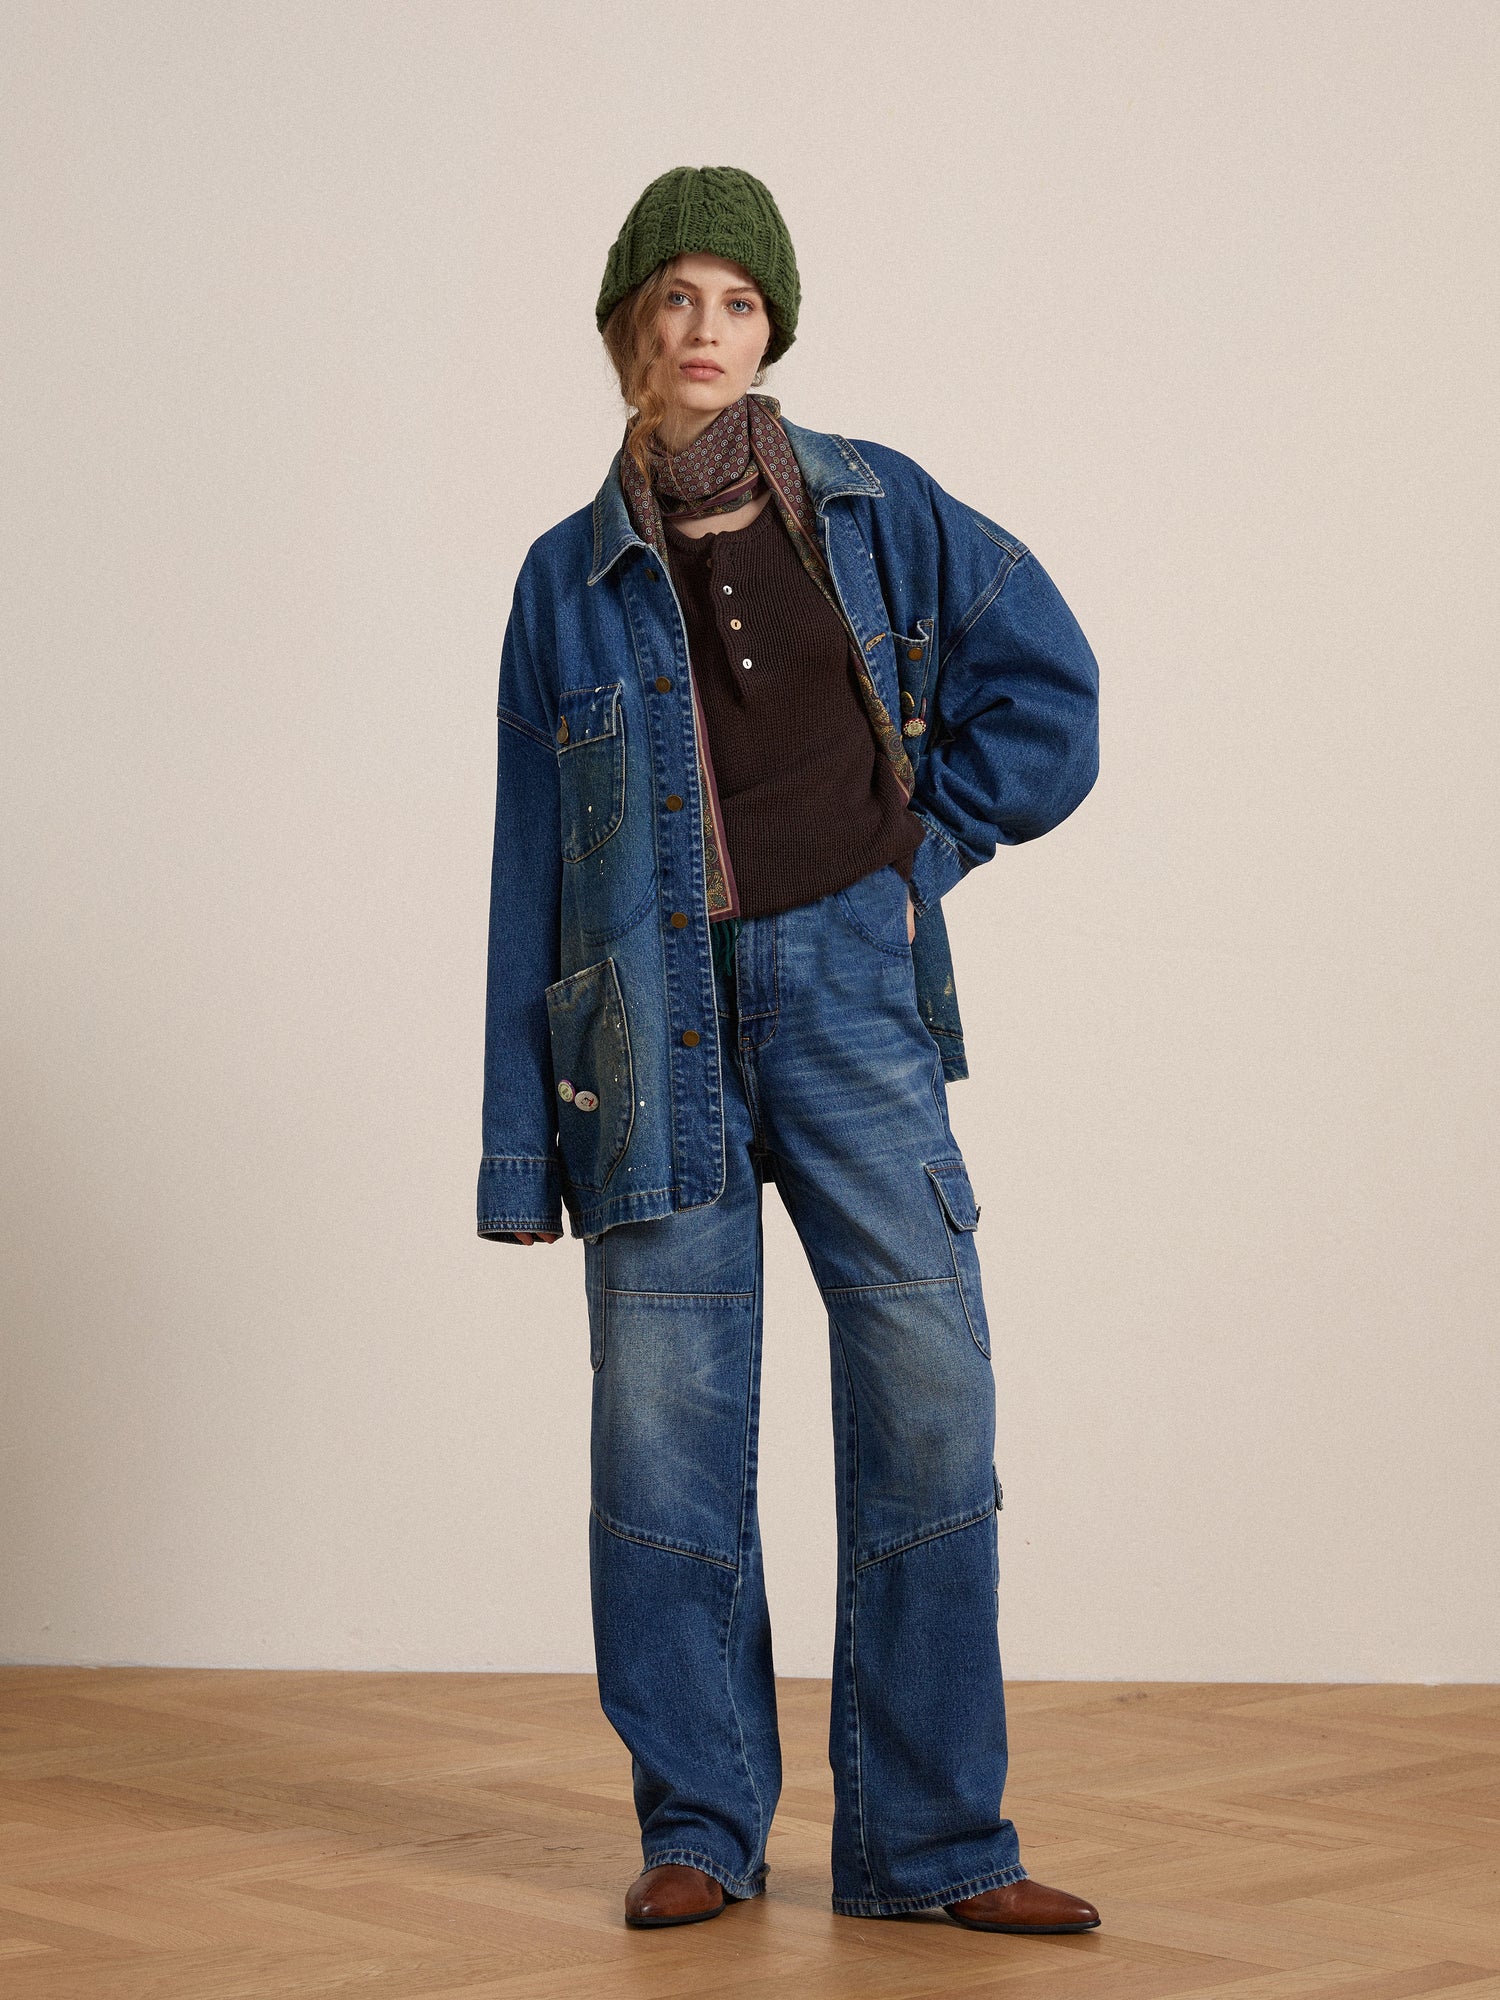 A woman wearing a denim jacket and Siwa Cargo Paneled Jeans, a brown sweater, green beanie, and brown shoes, stands confidently in a room with a wood floor.